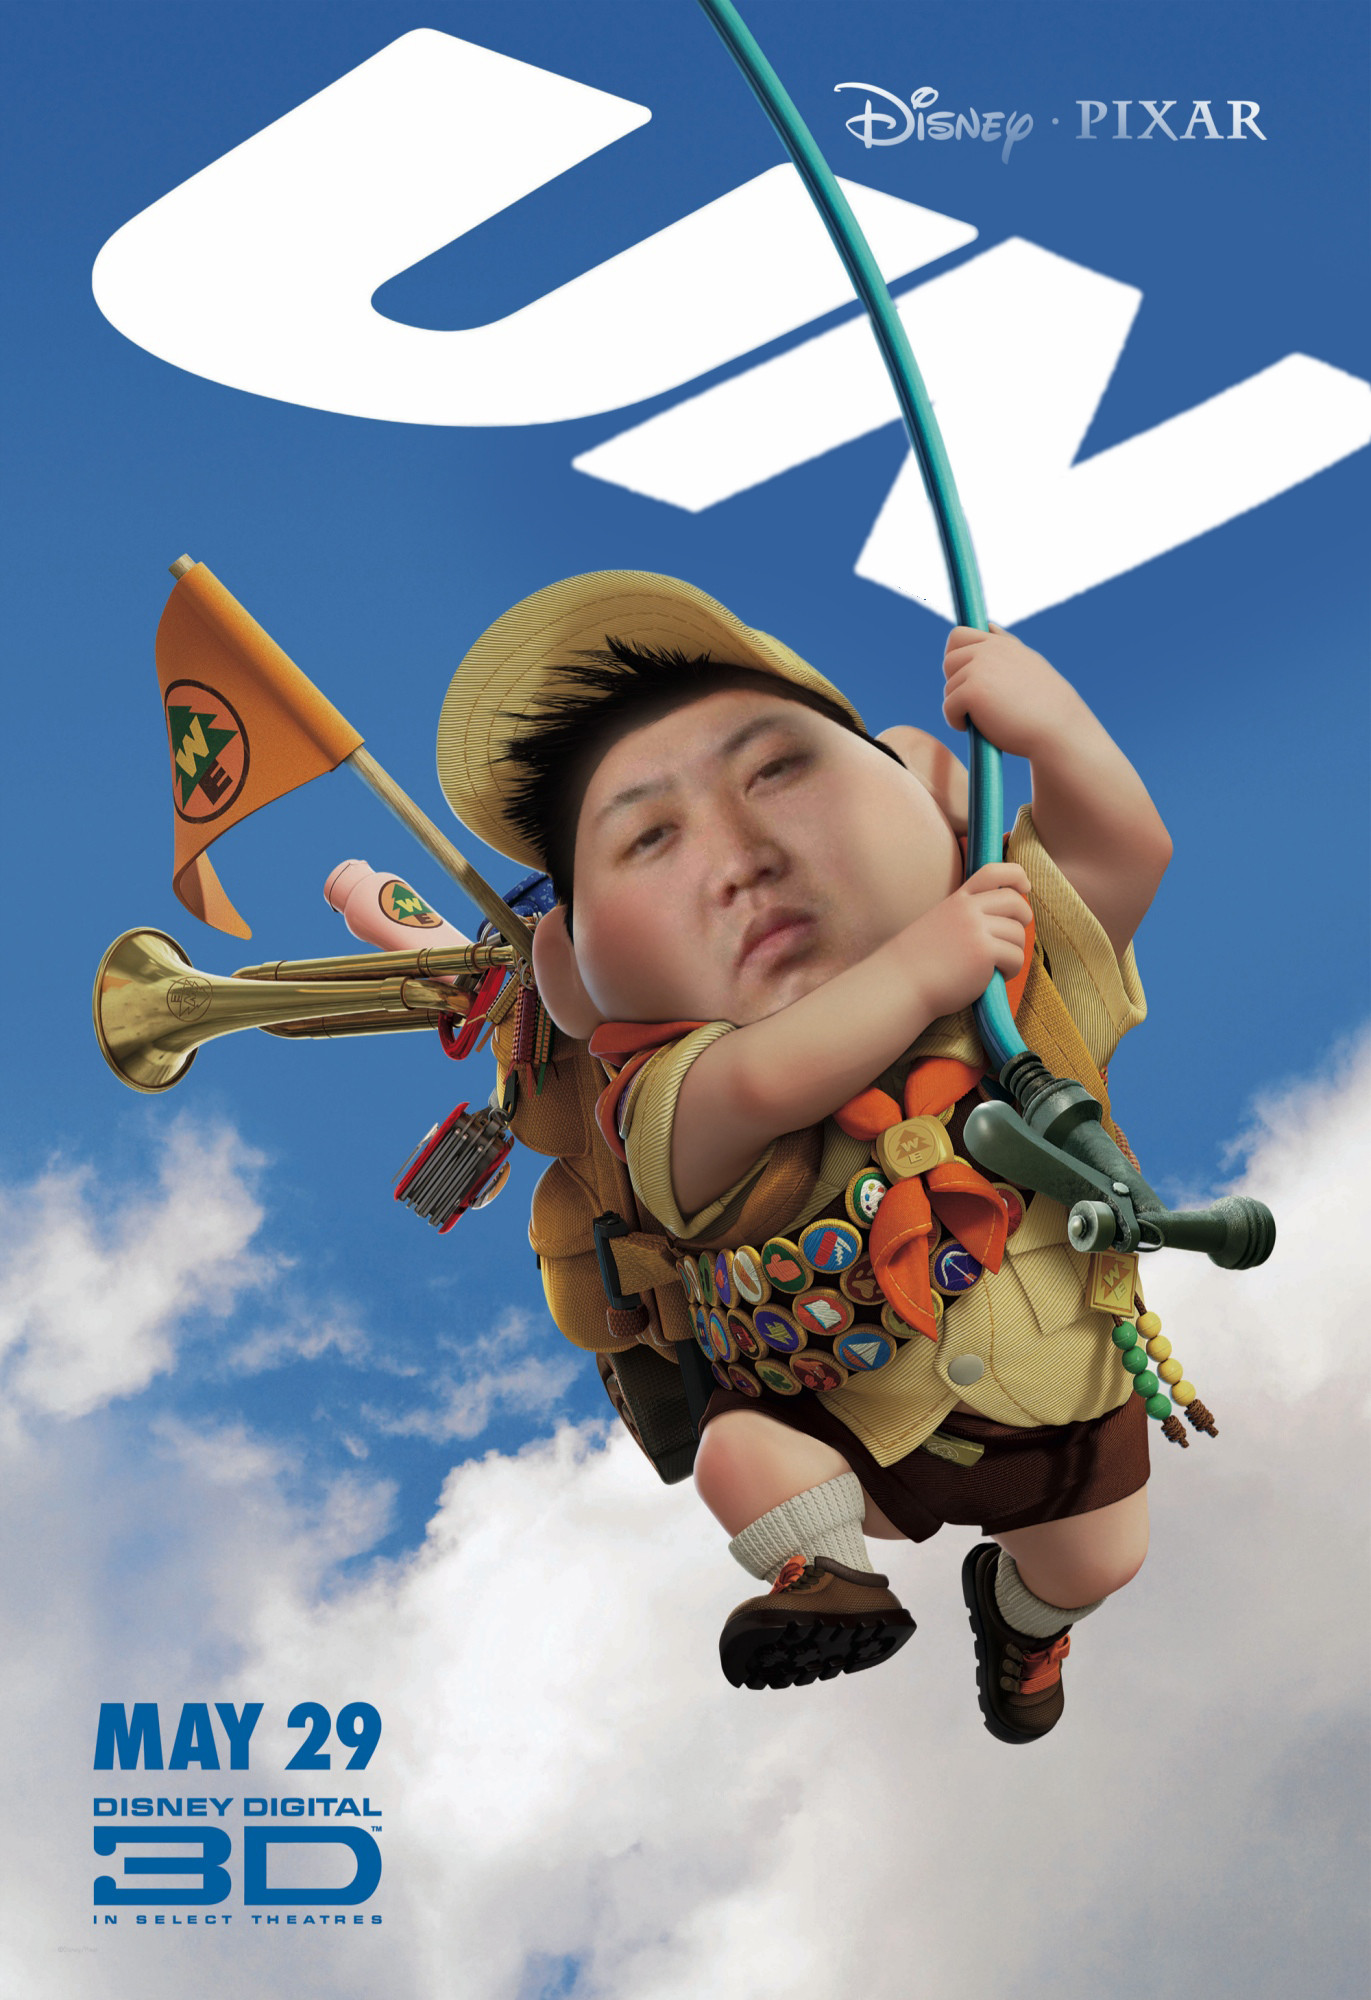 A movie that North Korea is okay with